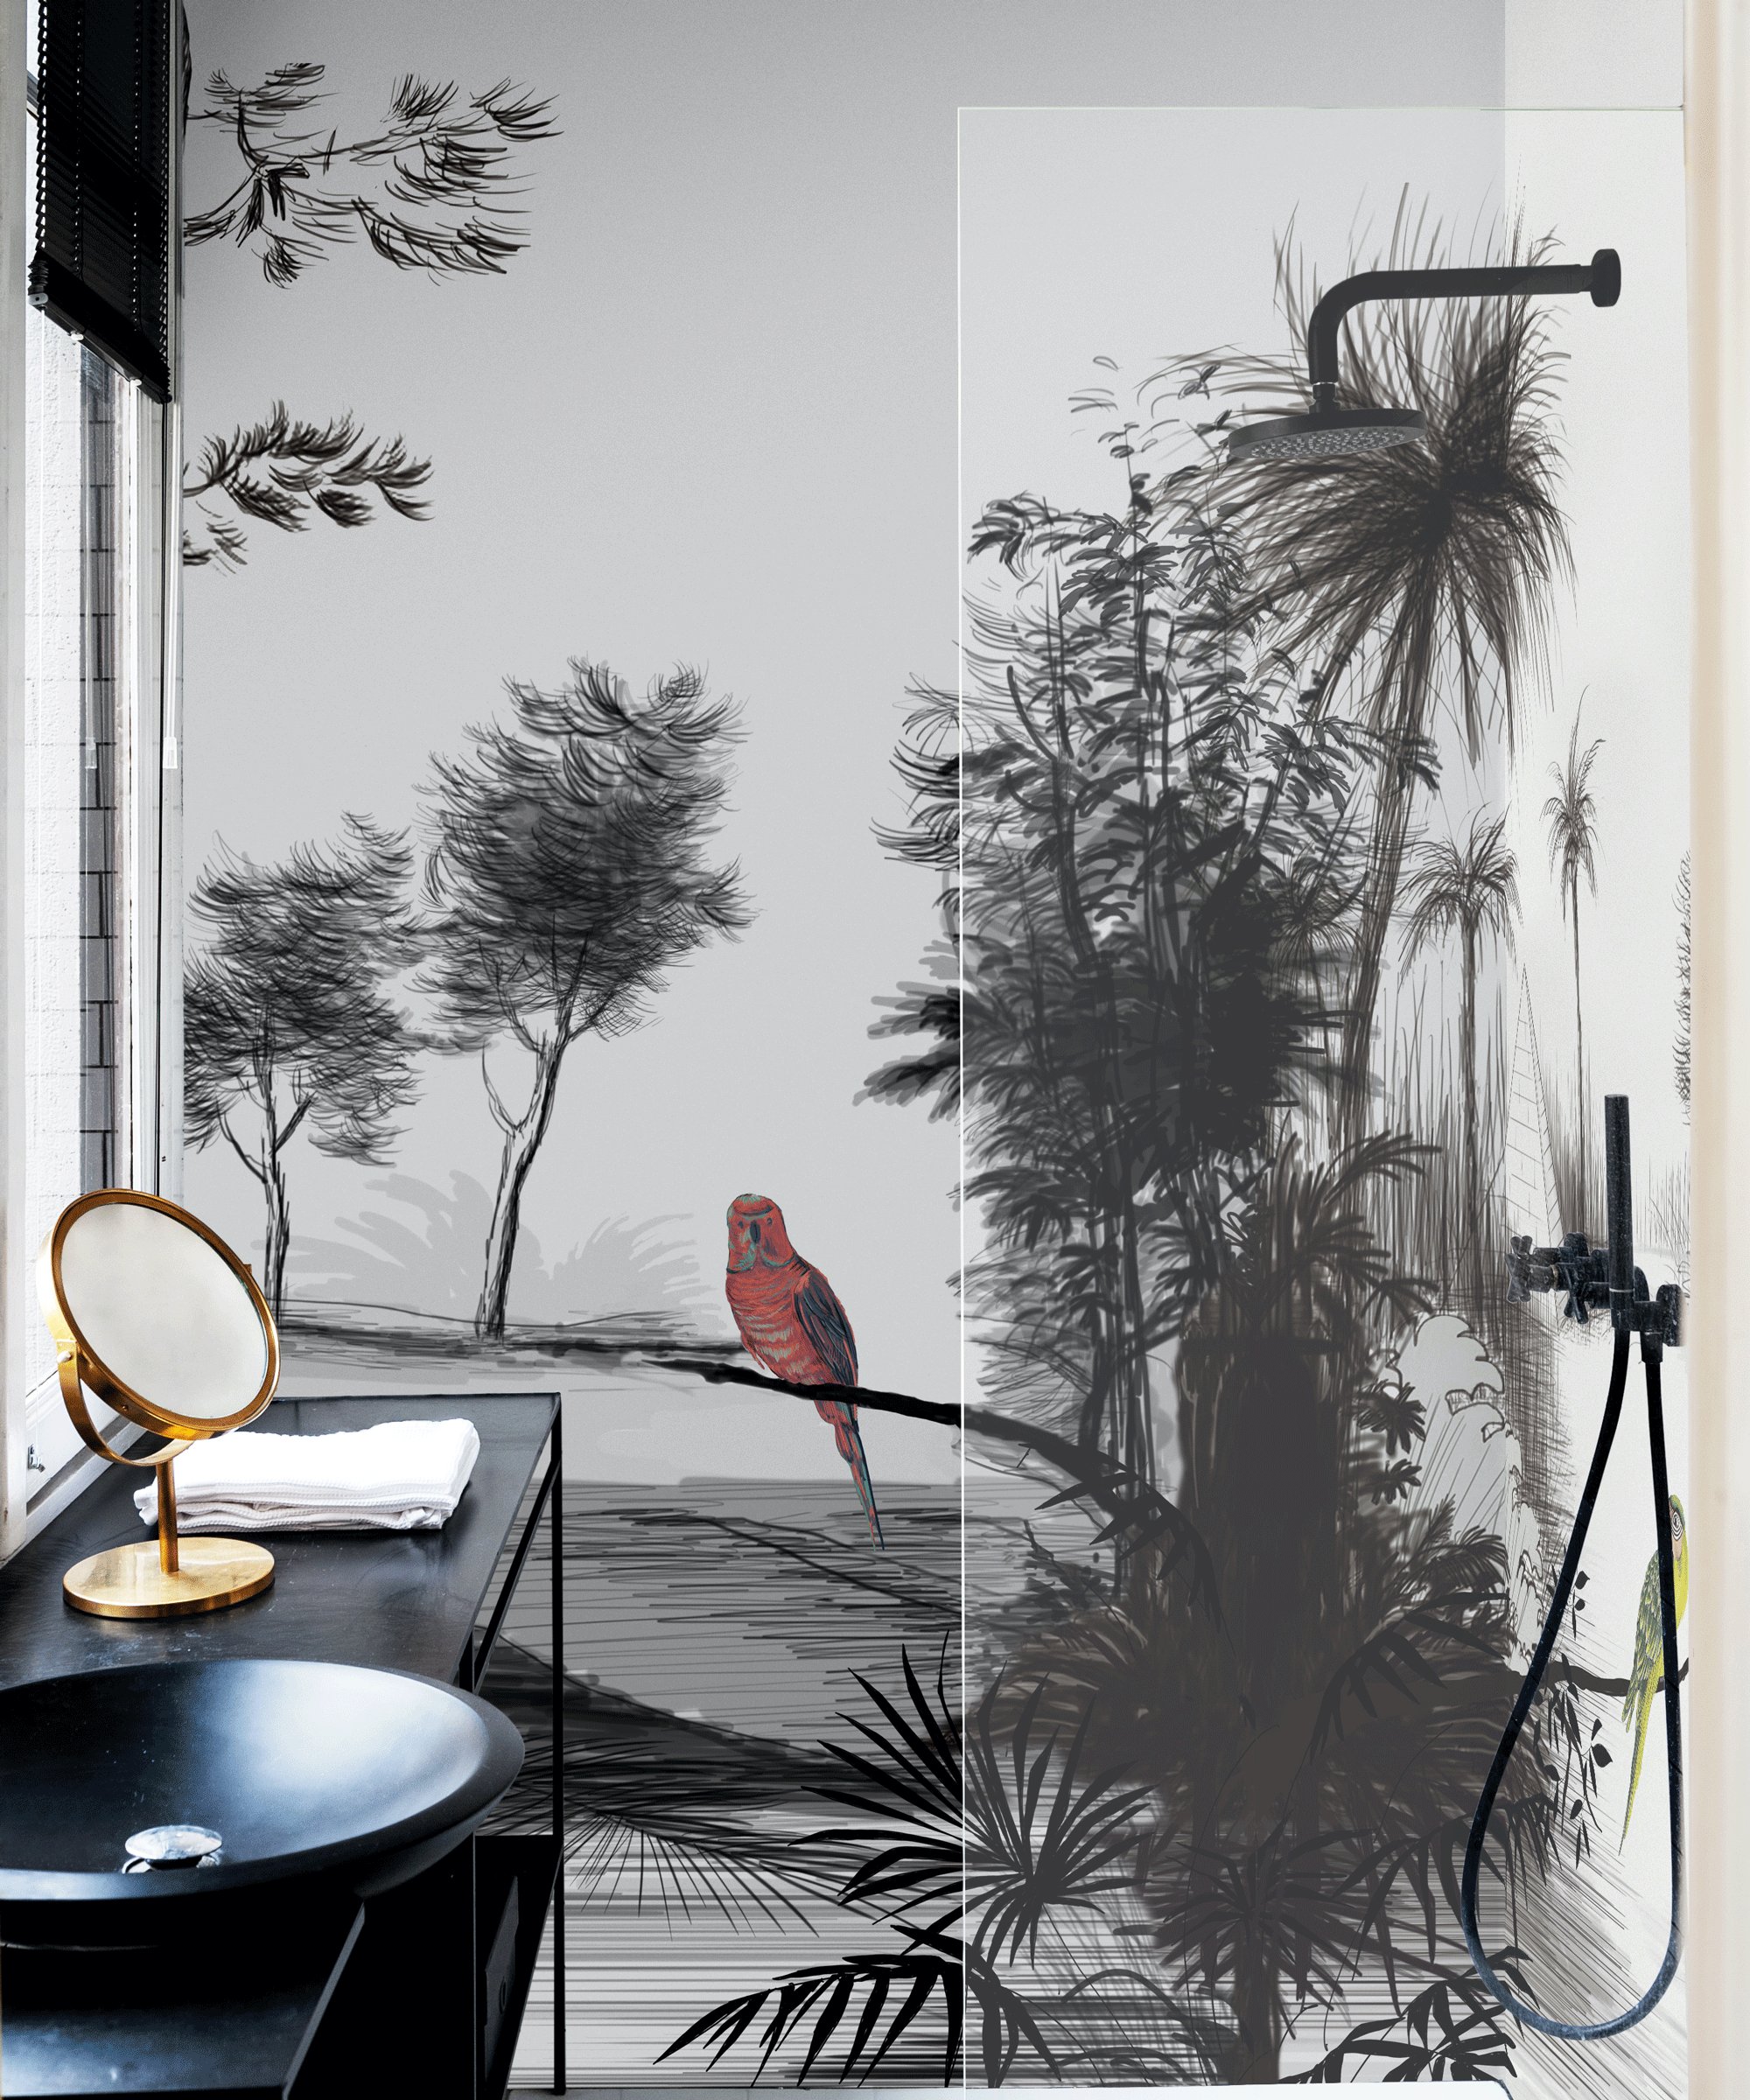 An example of bathroom wall ideas showing a shower with a black botanical wall mural with a red bird